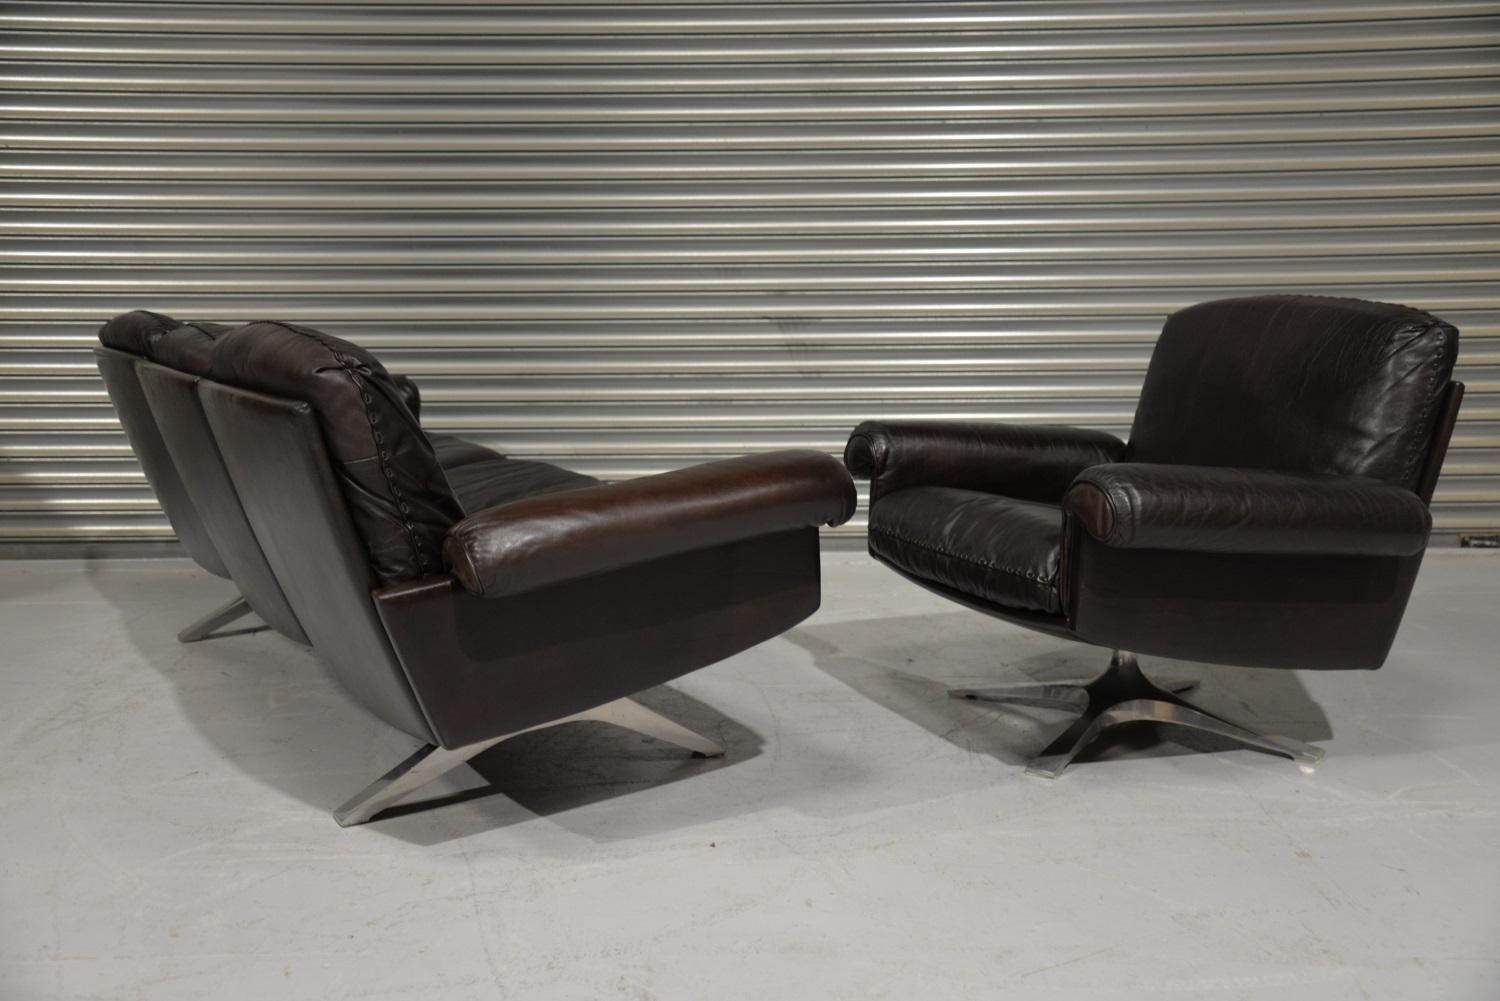 Vintage De Sede DS 31 Leather Sofa and Swivel Armchair, Switzerland, 1970s For Sale 2